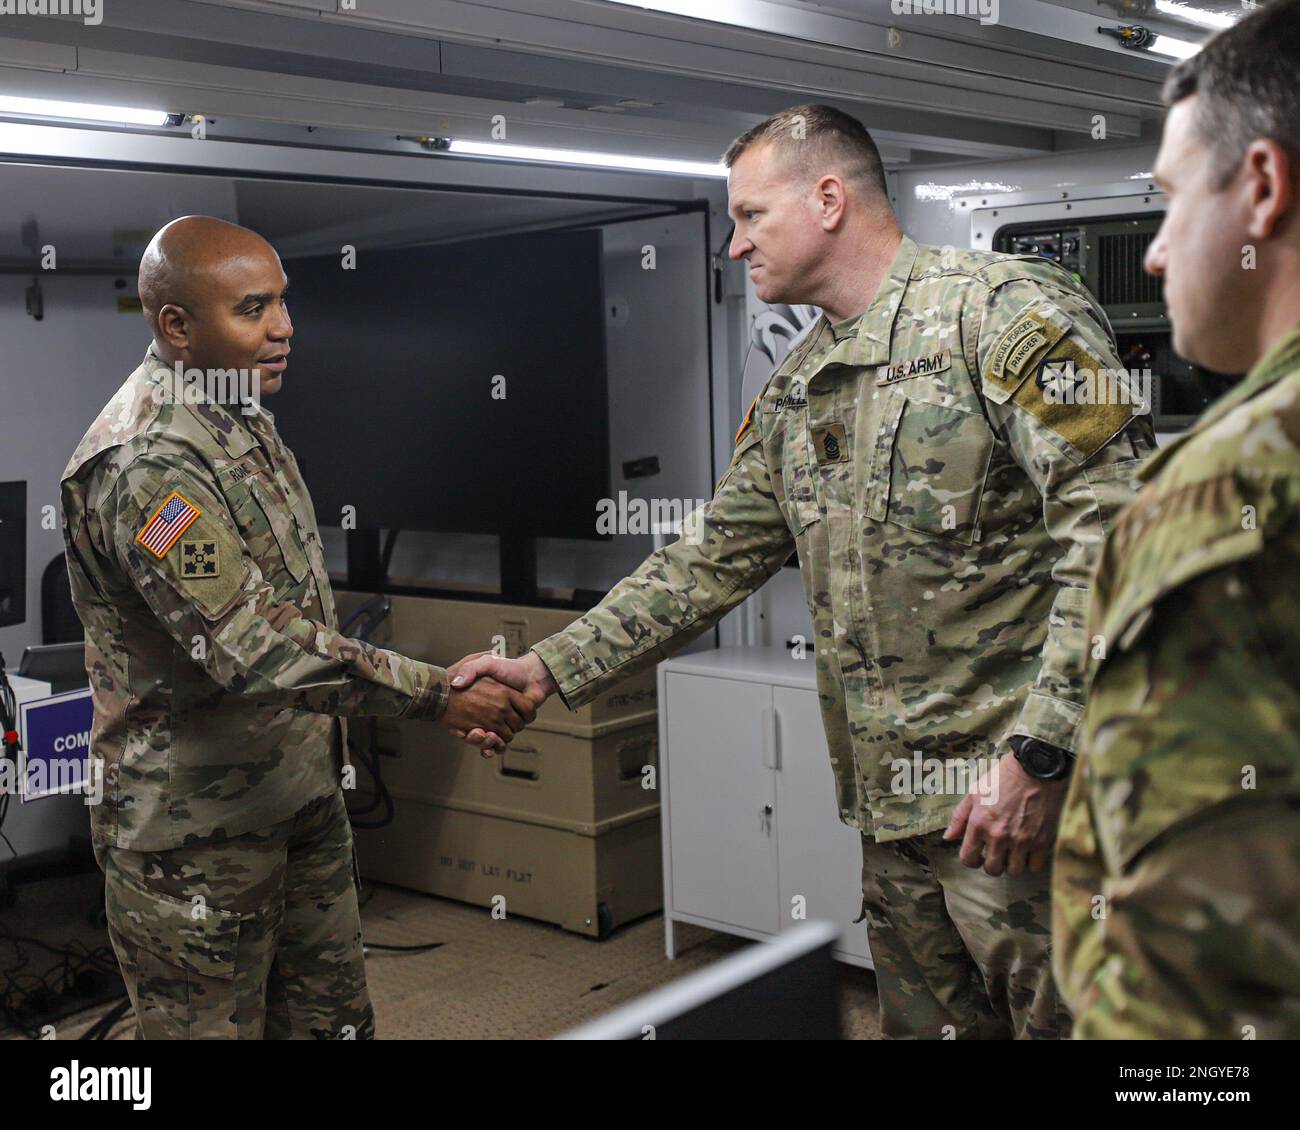 POZNAN, Poland - U.S. Army Brig. Gen. Monté Rone, Deputy Chief of Staff for Operations Multinational Corps Northeast, left, shakes the hand of Sgt. Maj. Timothy Parnell, sergeant major of operations, V Corps (Forward), Dec. 1, 2022, Camp Kosciuszko, Poland. Leaders and officers from MNCNE visited V Corps’ Forward Headquarters to observe the compatibility between U.S., MNCNE, and NATO communication systems. Stock Photo